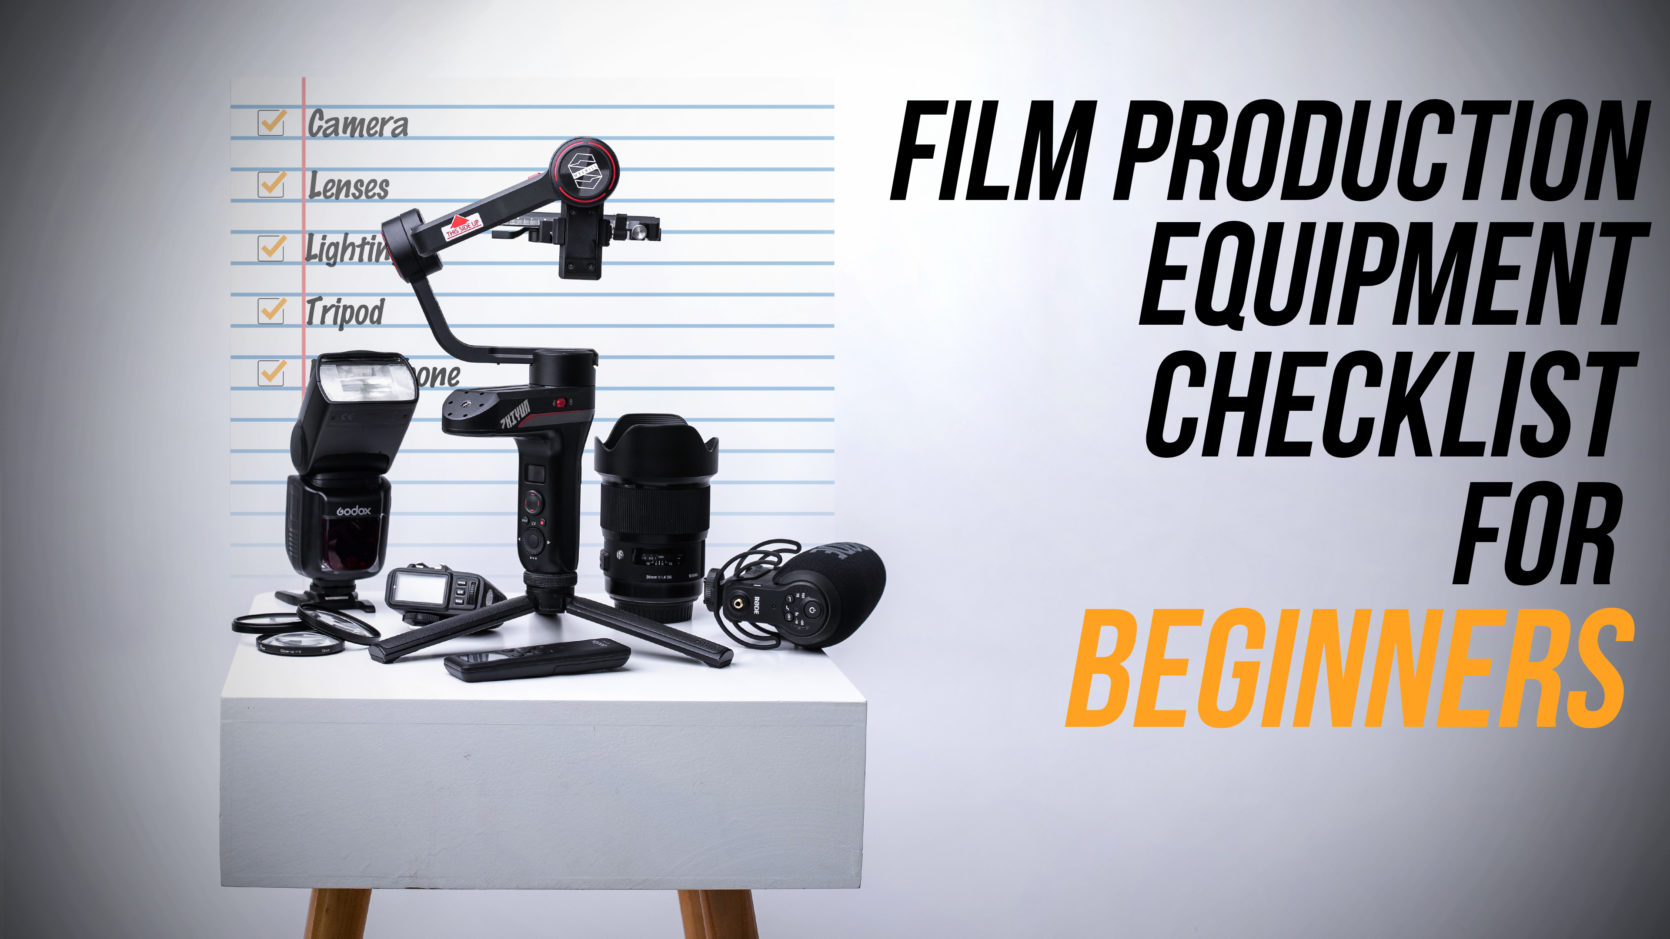 Film Production Equipment Checklist for Beginners